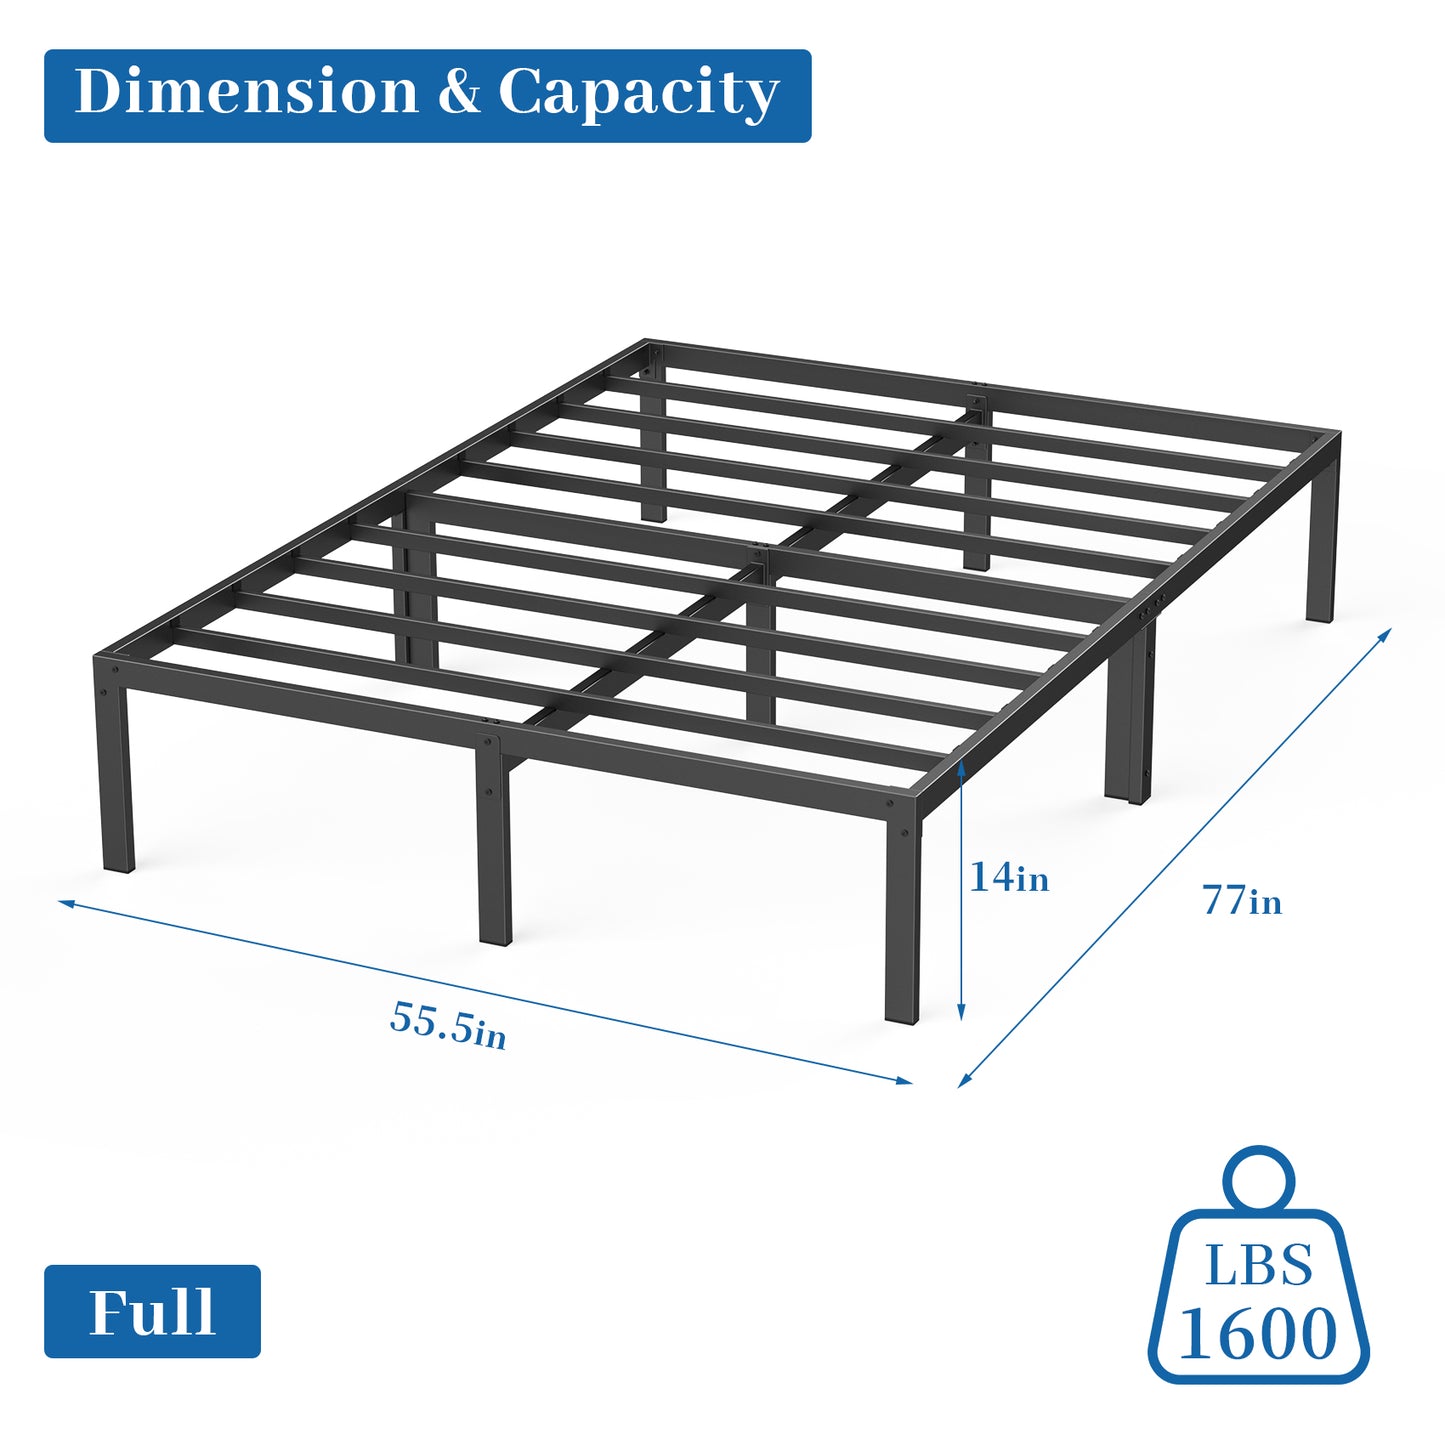 Mr IRONSTONE Full Bed Frame, Heavy Duty Full Size Metal Platform Bed Frame, 14" High with Storage, No Box Spring Needed, Black